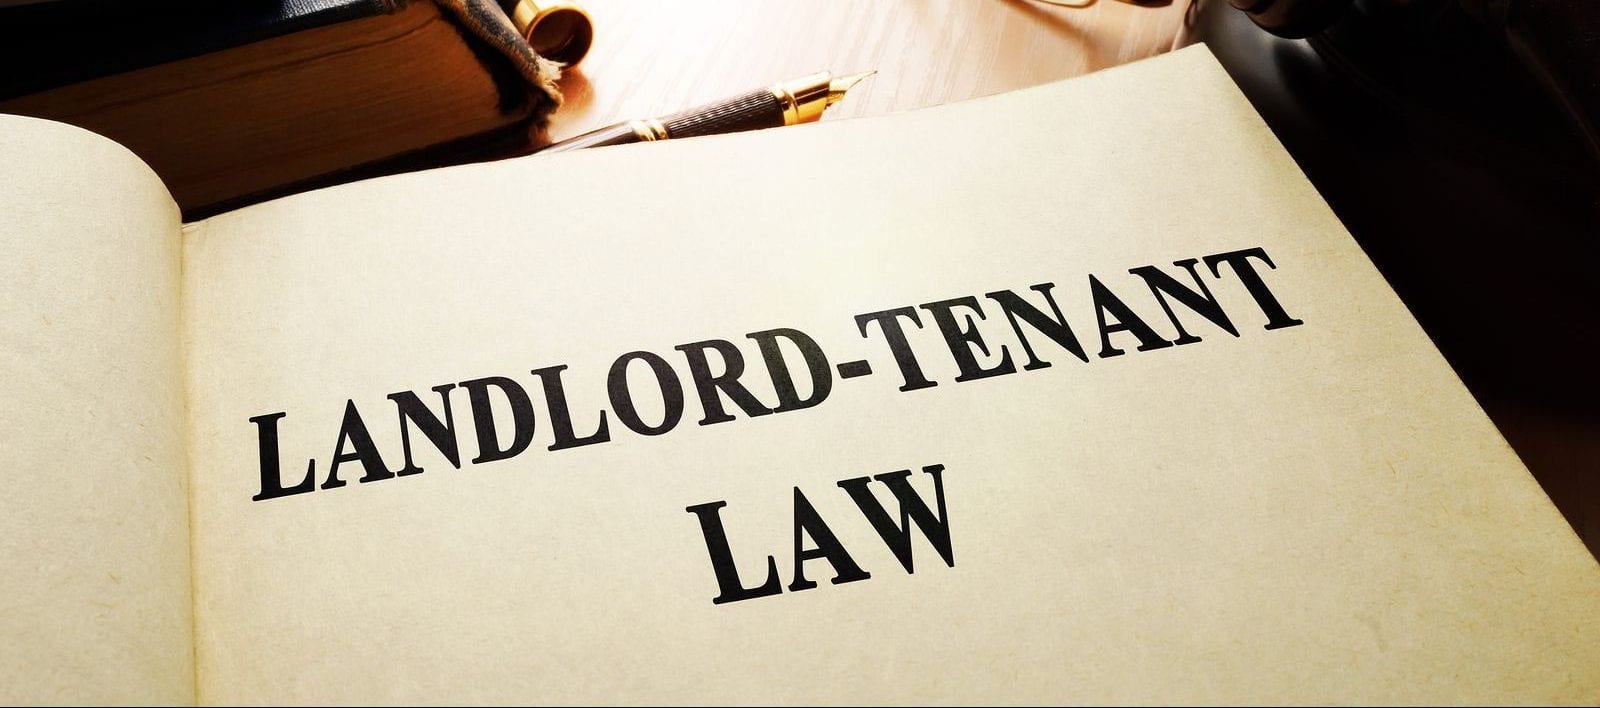 New law to change Landlord-Tenant affairs